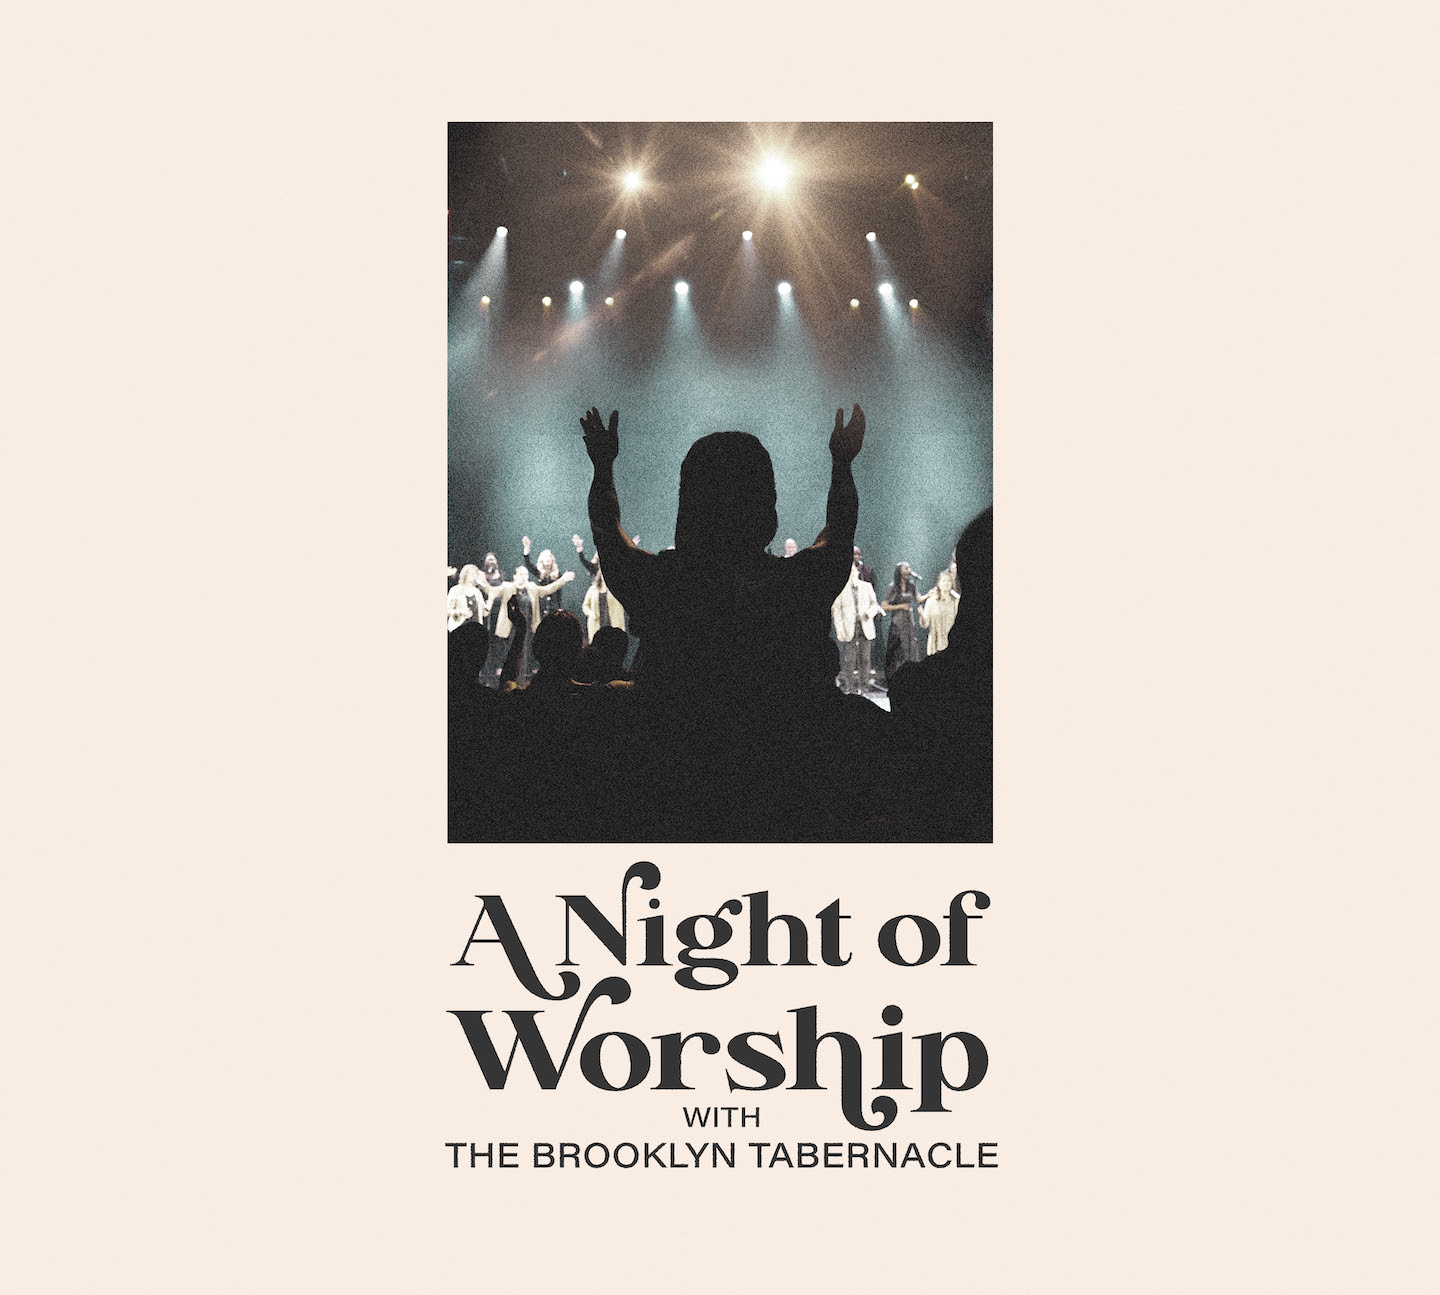 `A Night of Worship with The Brooklyn Tabernacle` (Image courtesy of Turning Point Media Relations)